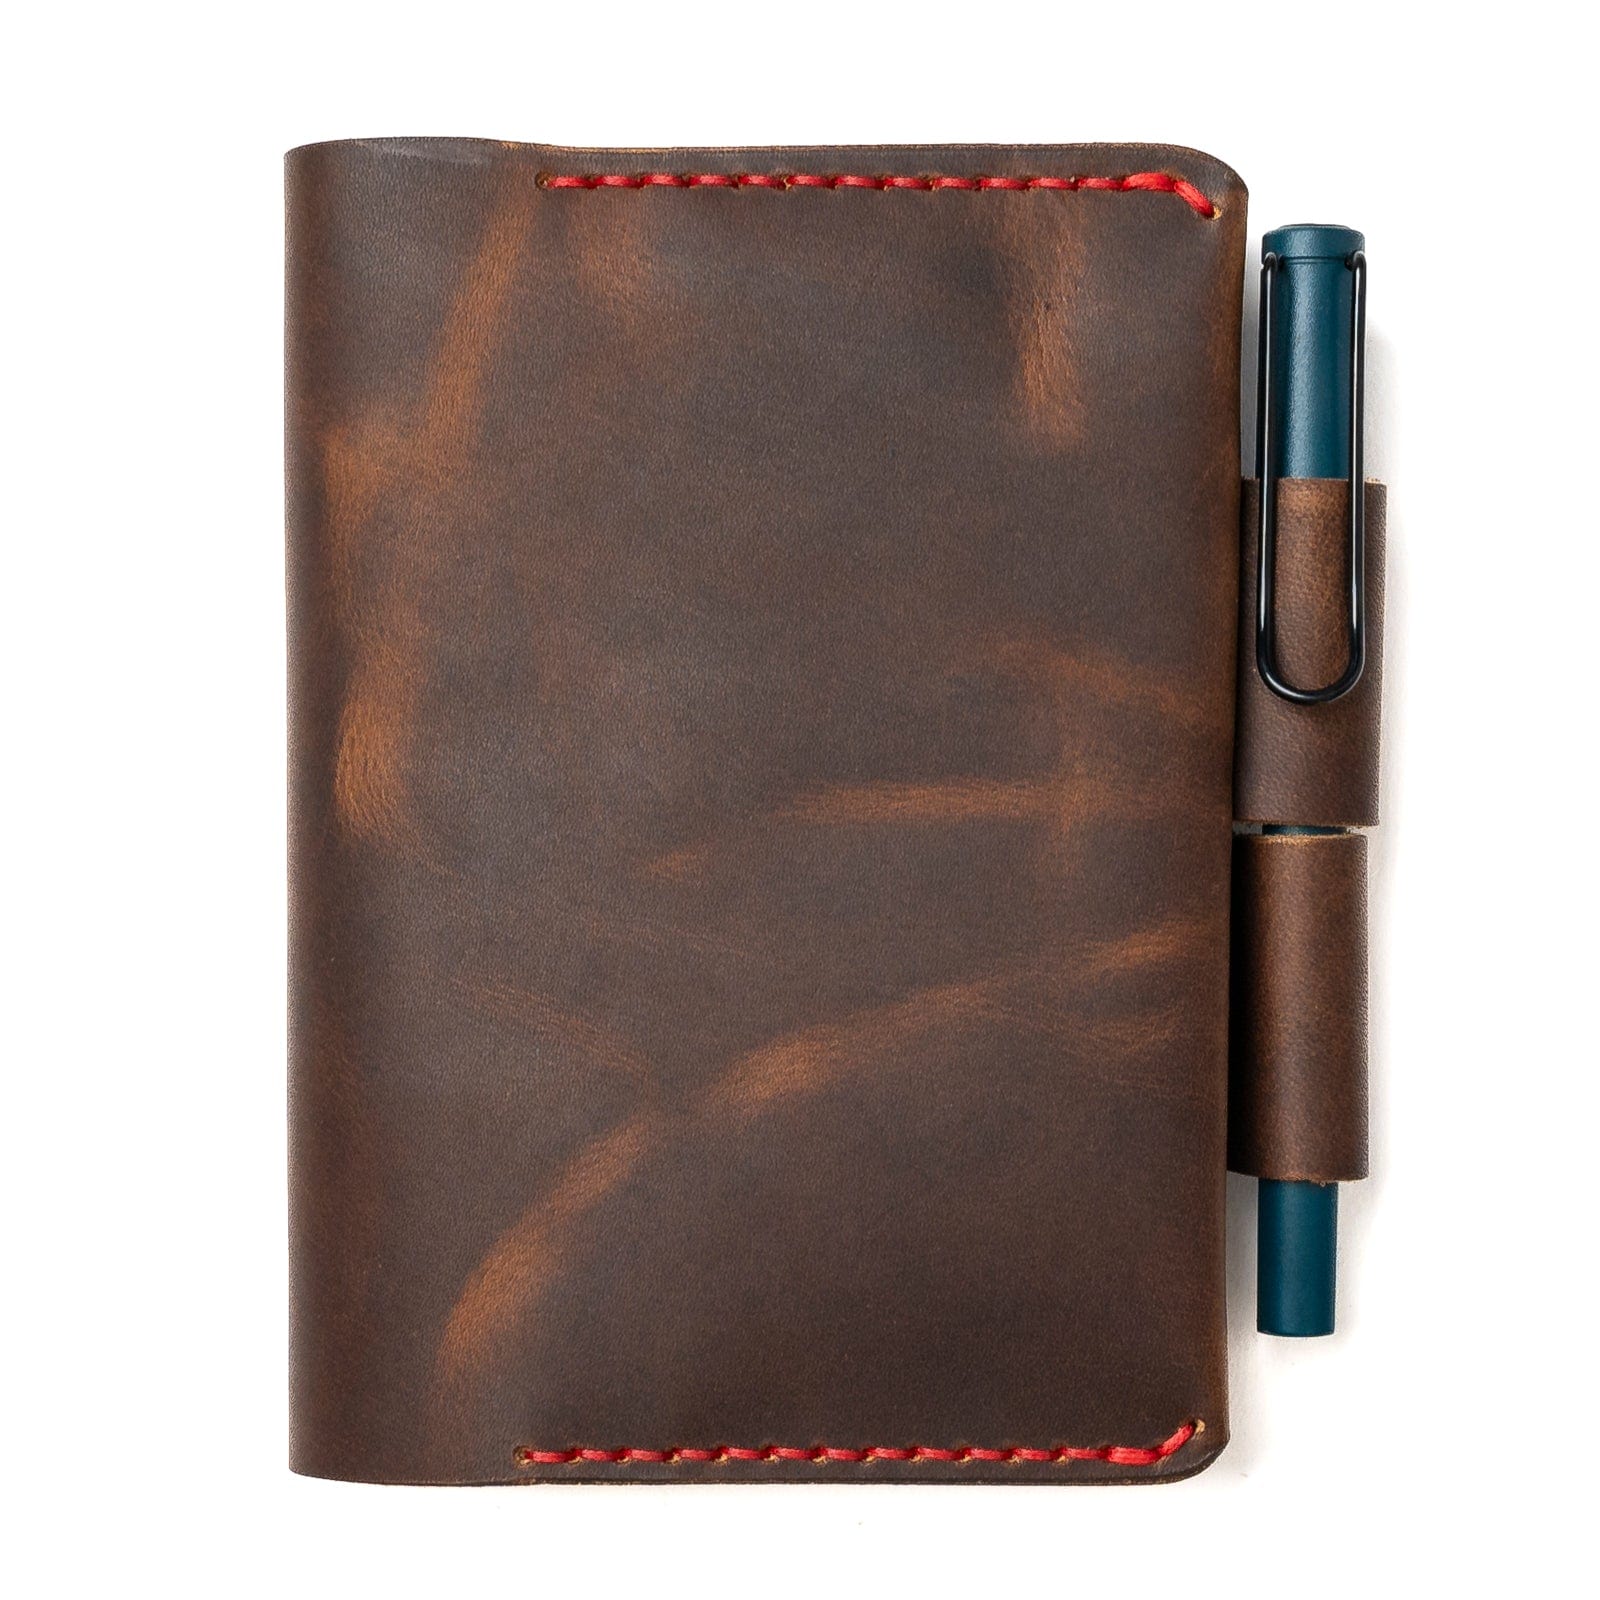 Leather Midori MD A6 Notebook Cover - Heritage Brown Popov Leather